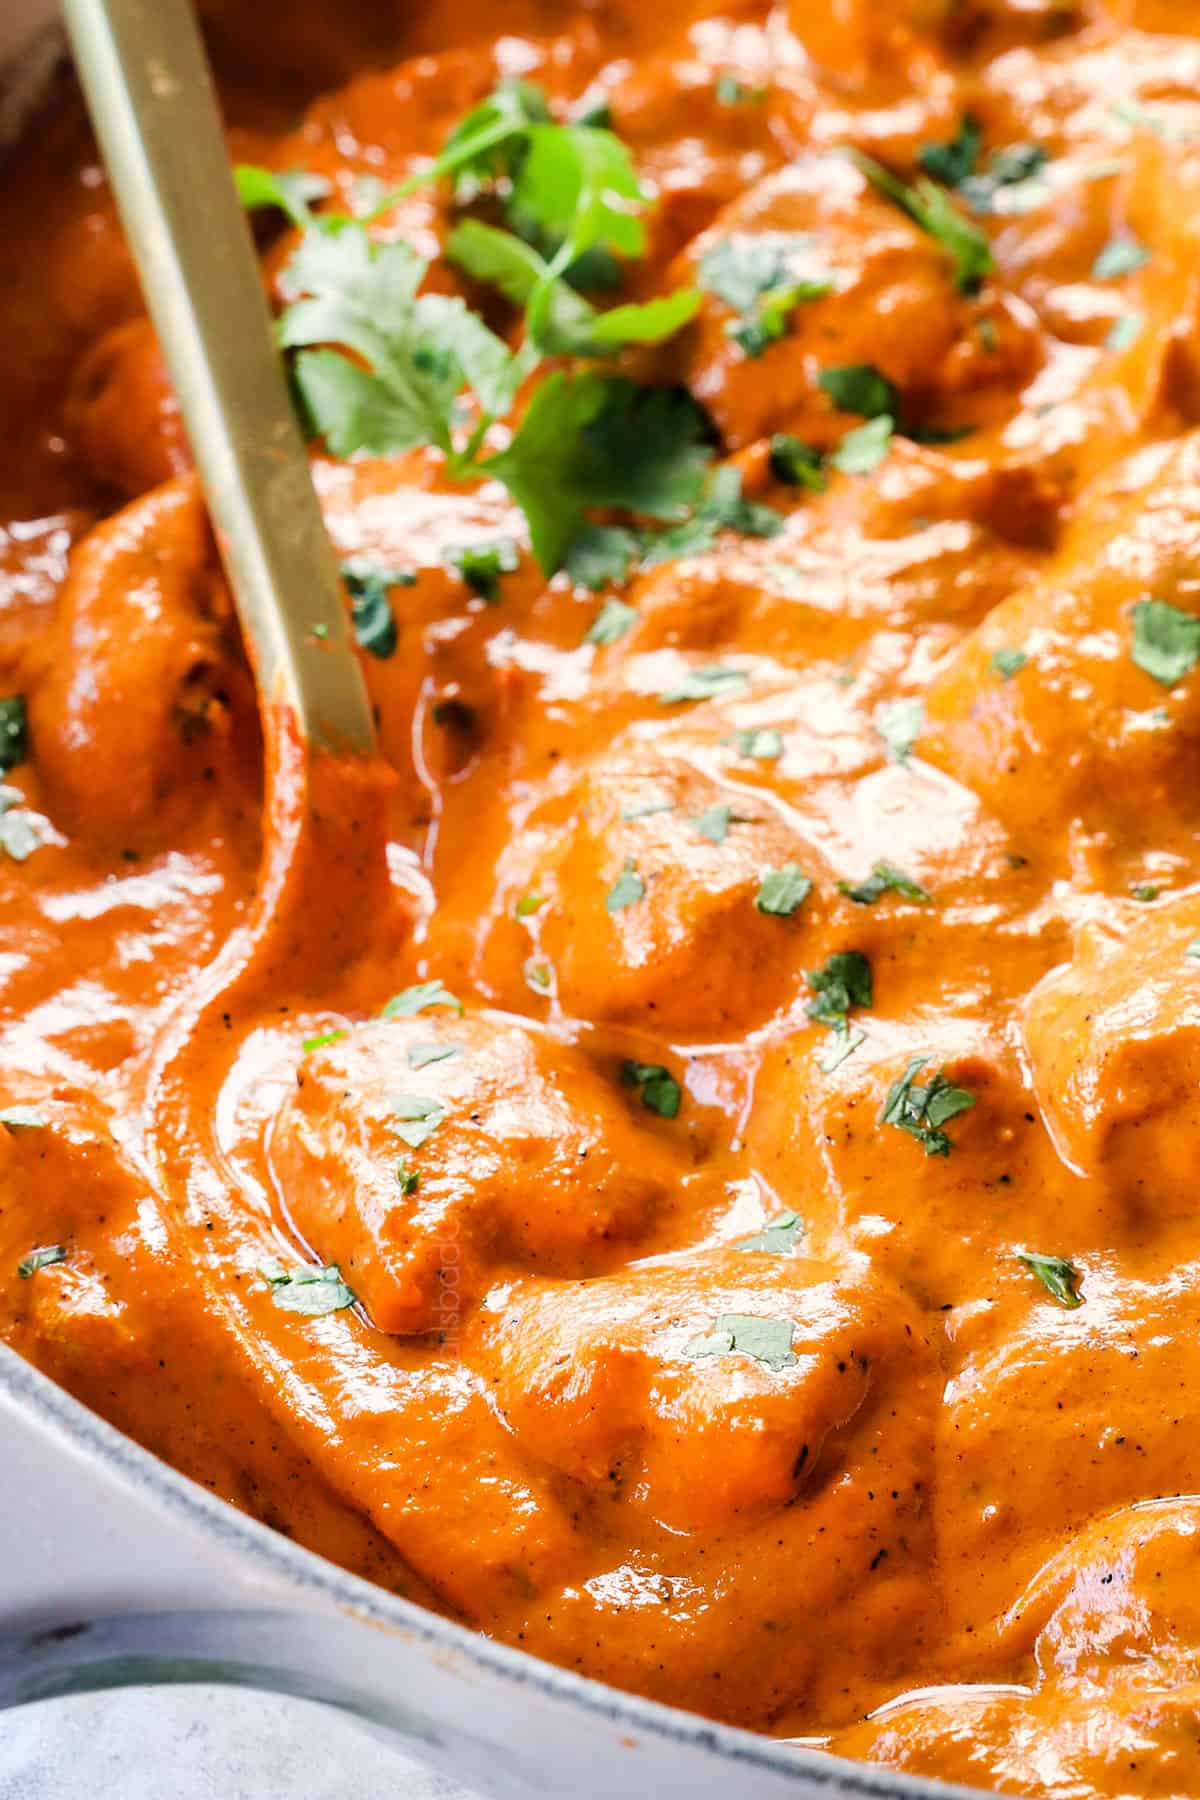 up close of chicken tikka masala showing how juicy the chicken is